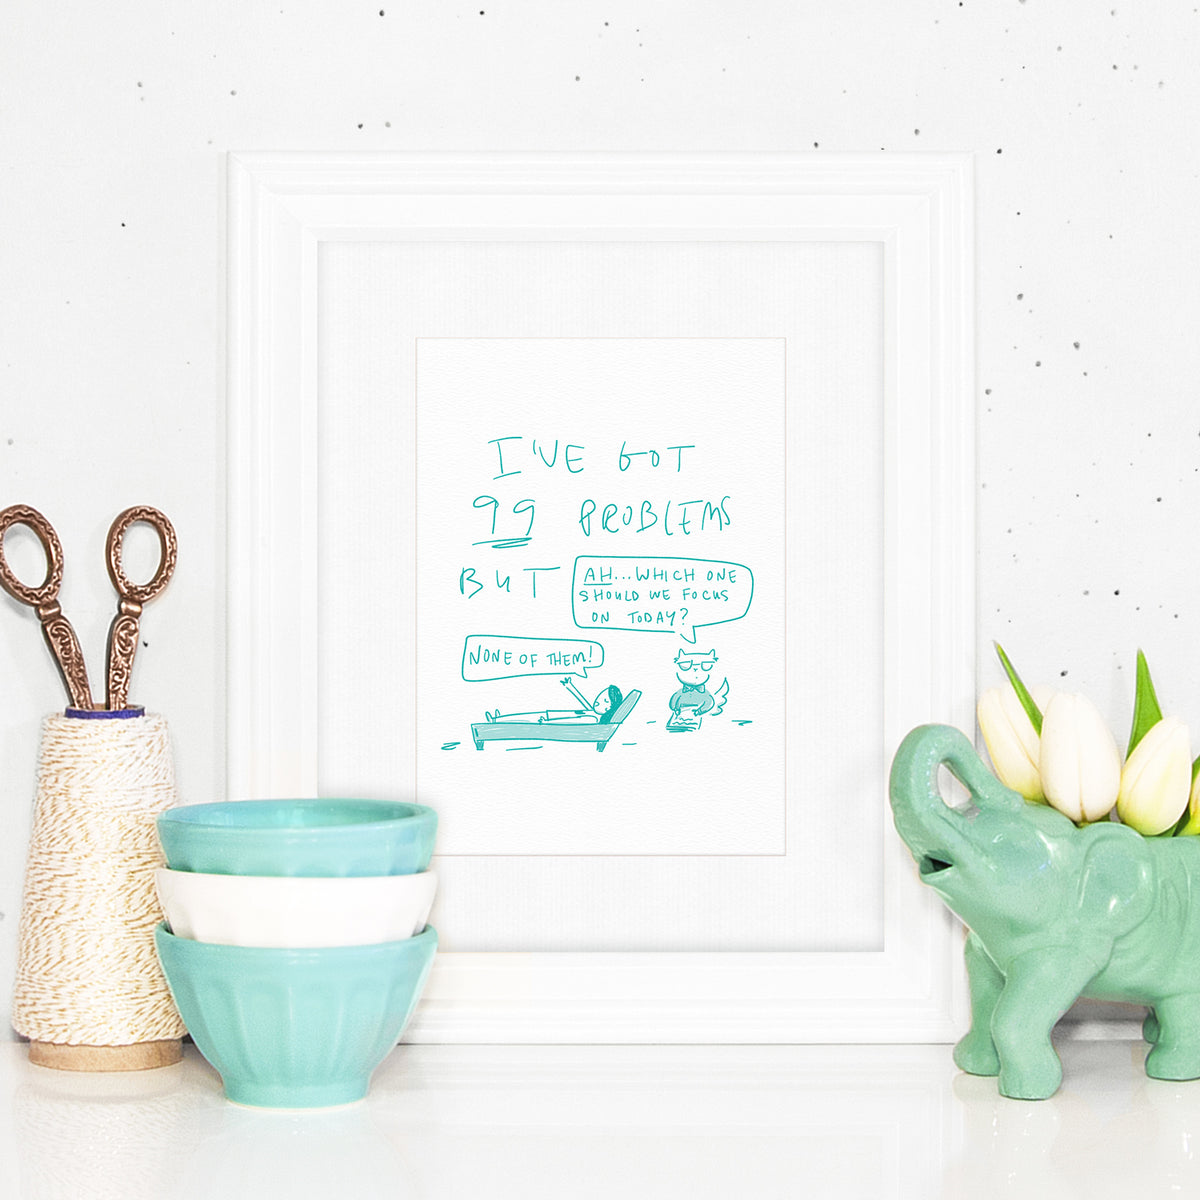 I've Got 99 Problems -- And ah, which one should we focus on today? -- None of them! ~ Cat therapist art print by My Cat Is People